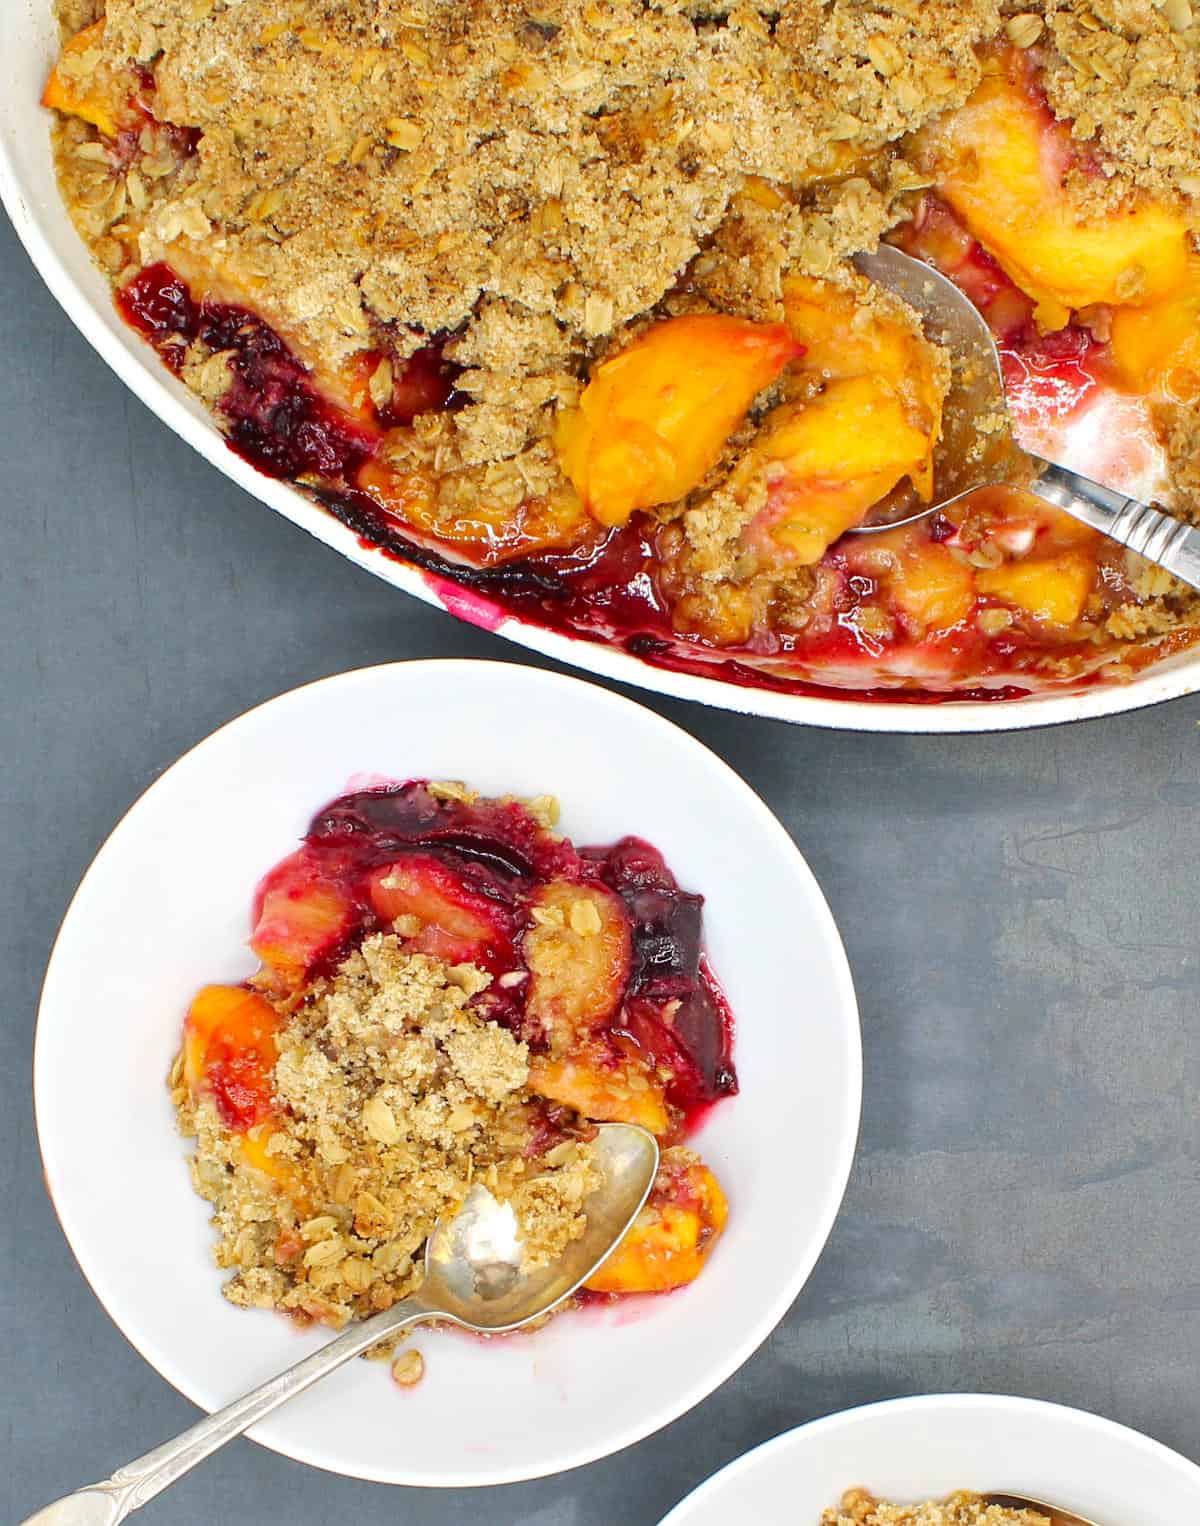 Vegan Peach and Plum Crisp in a white bowl with a spoon and the baking dish with the crisp and pieces of peach.